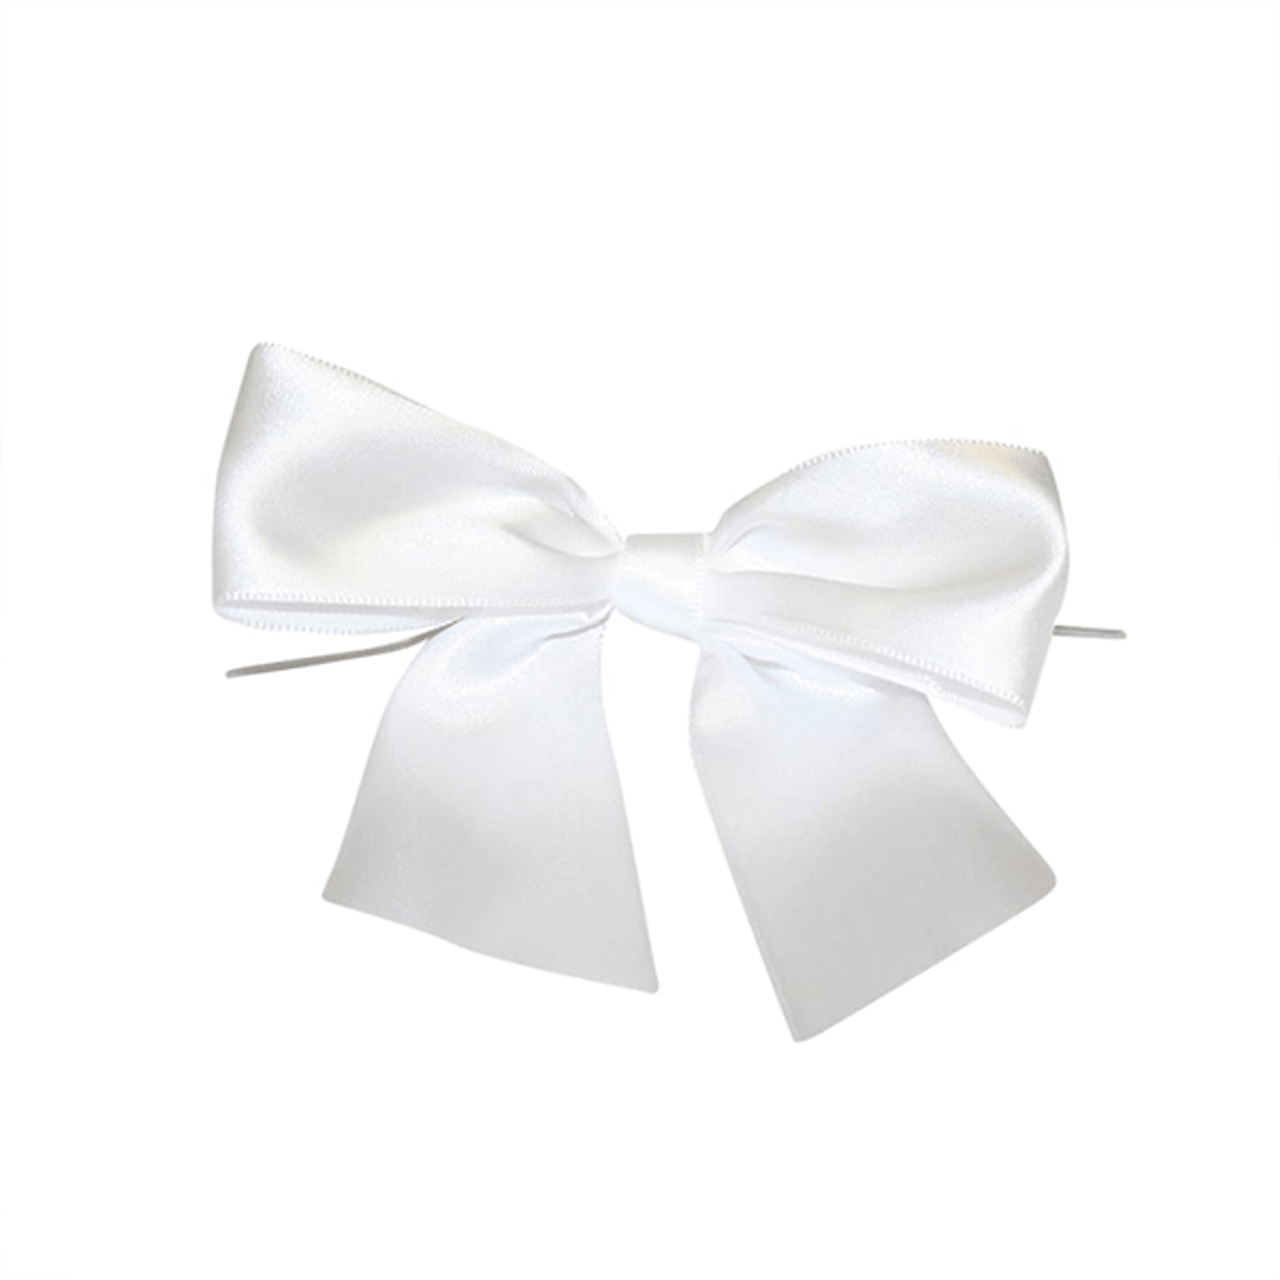 1-1/2" Pre-Tied Bows - Over 25 Colors